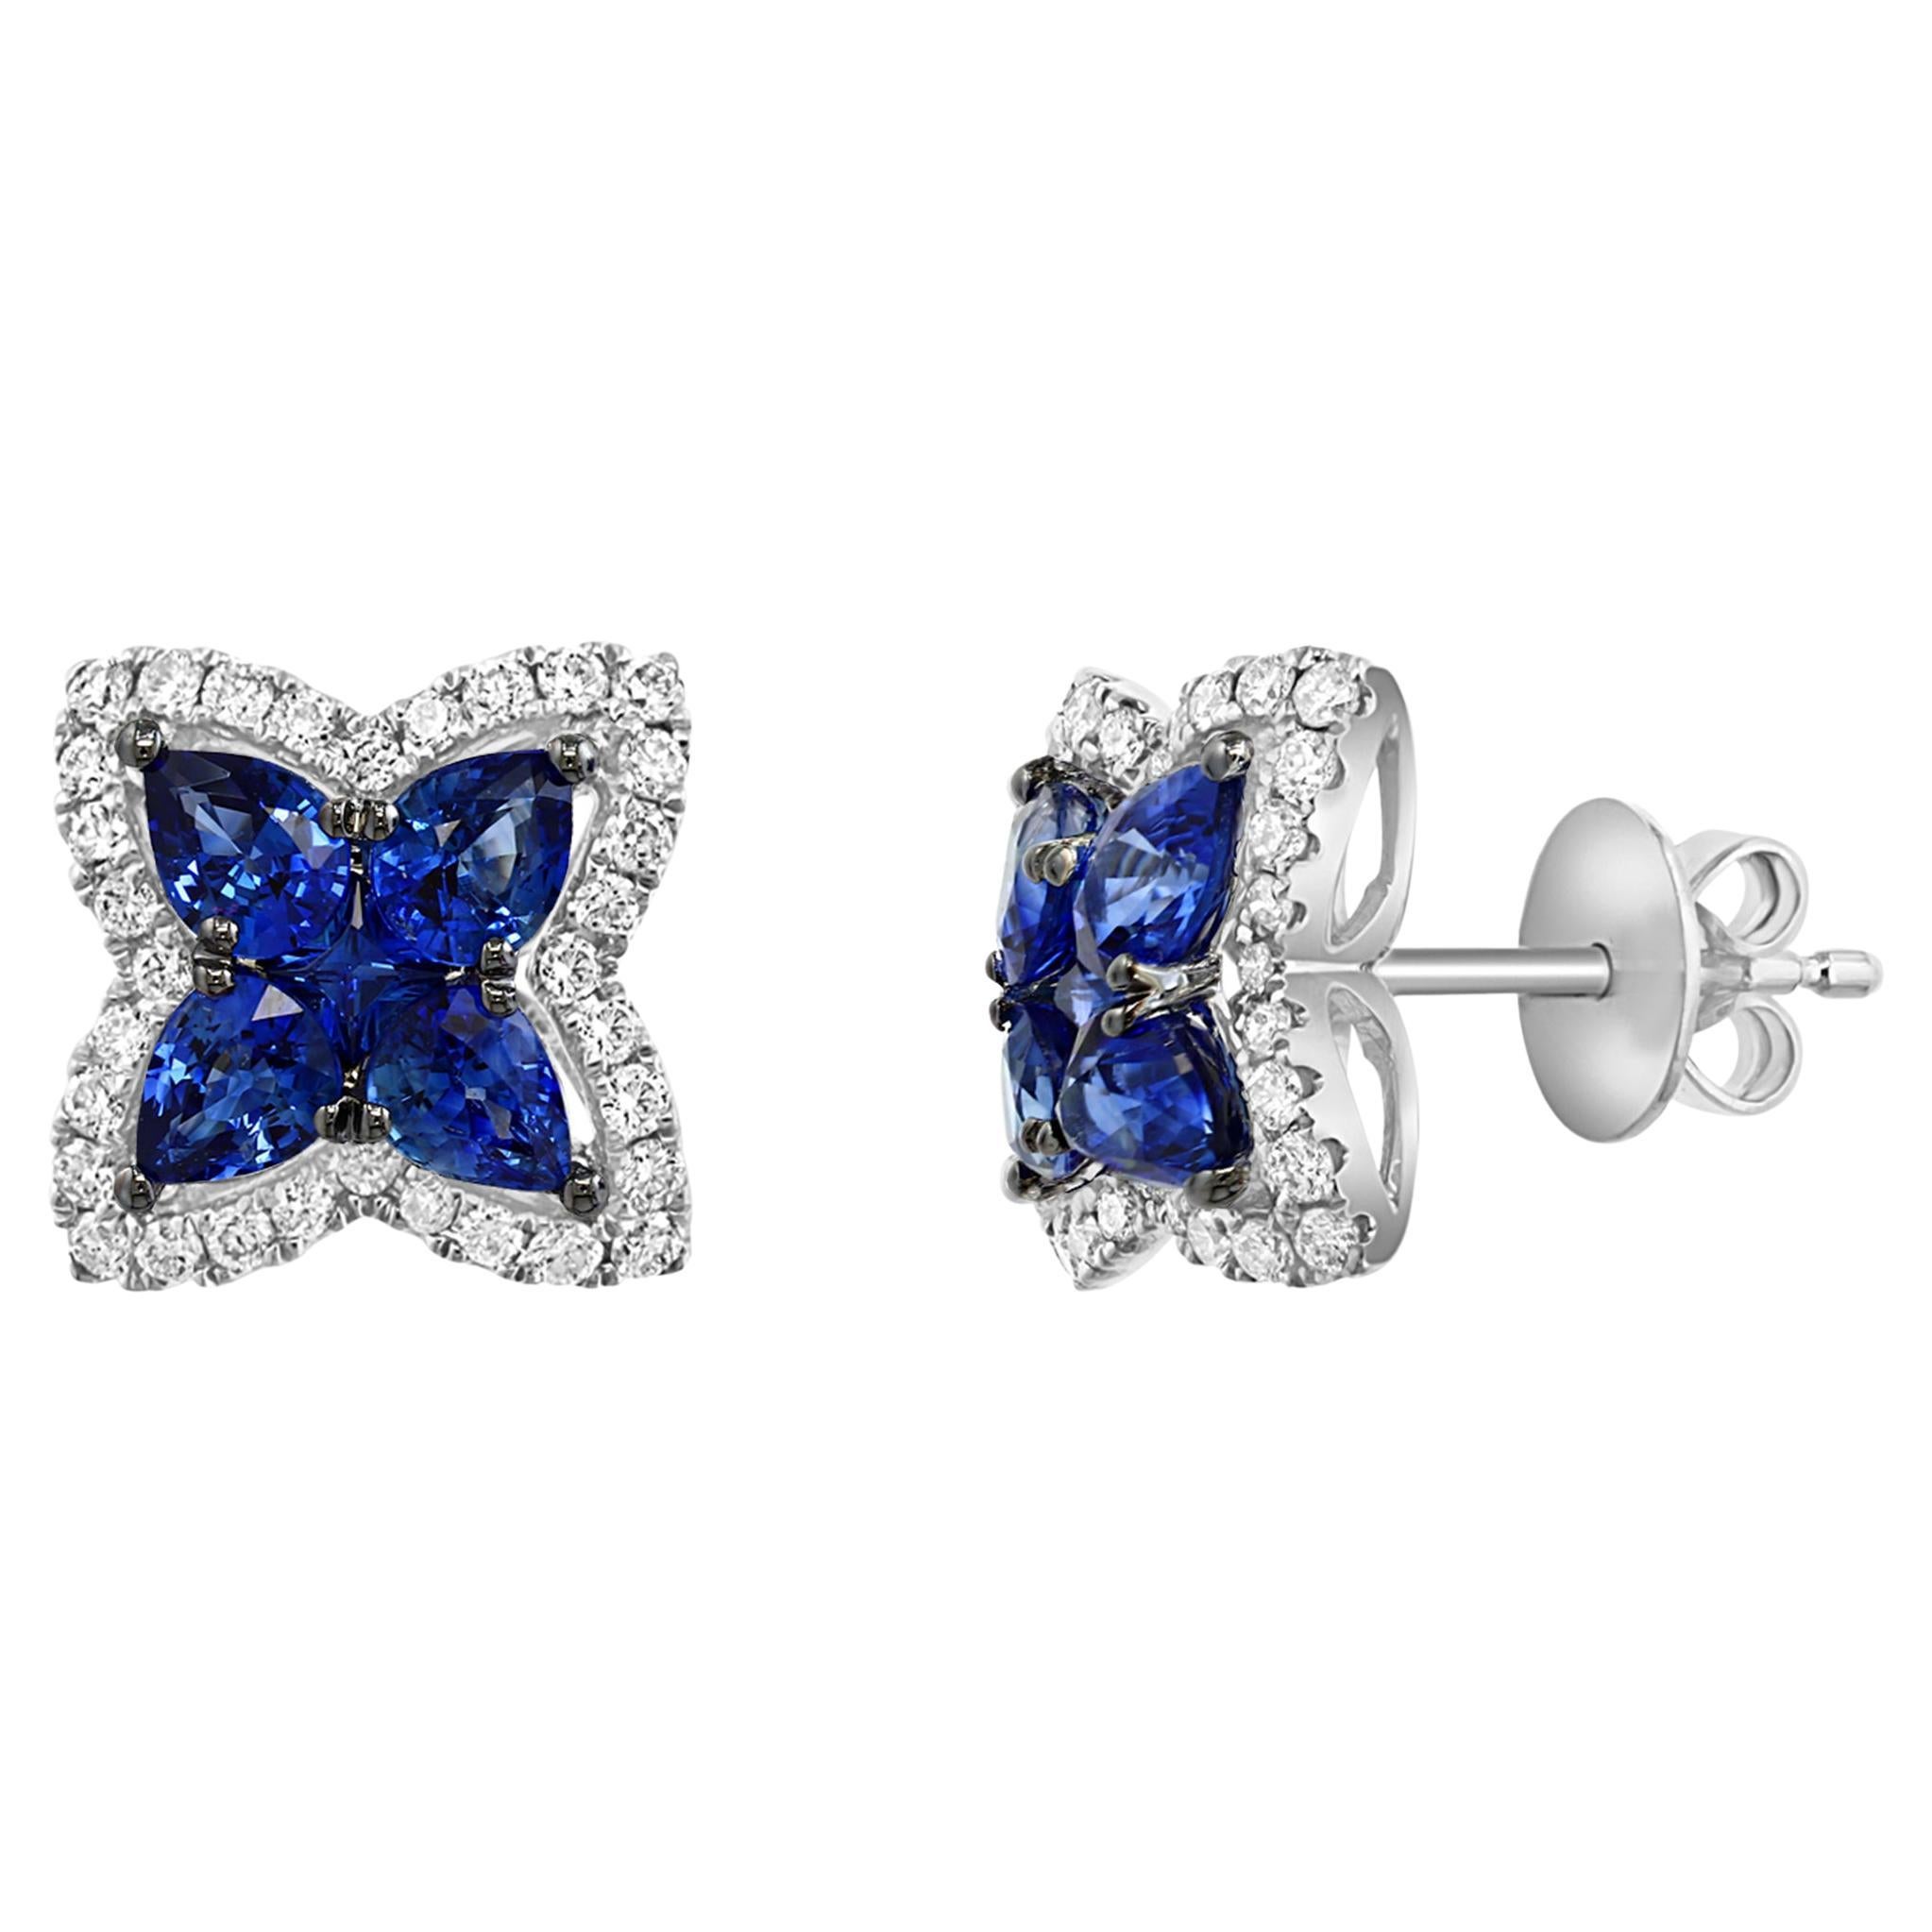 1.48 Carat Pear Shape Sapphire and Diamond Stud Earrings in 18K White Gold For Sale